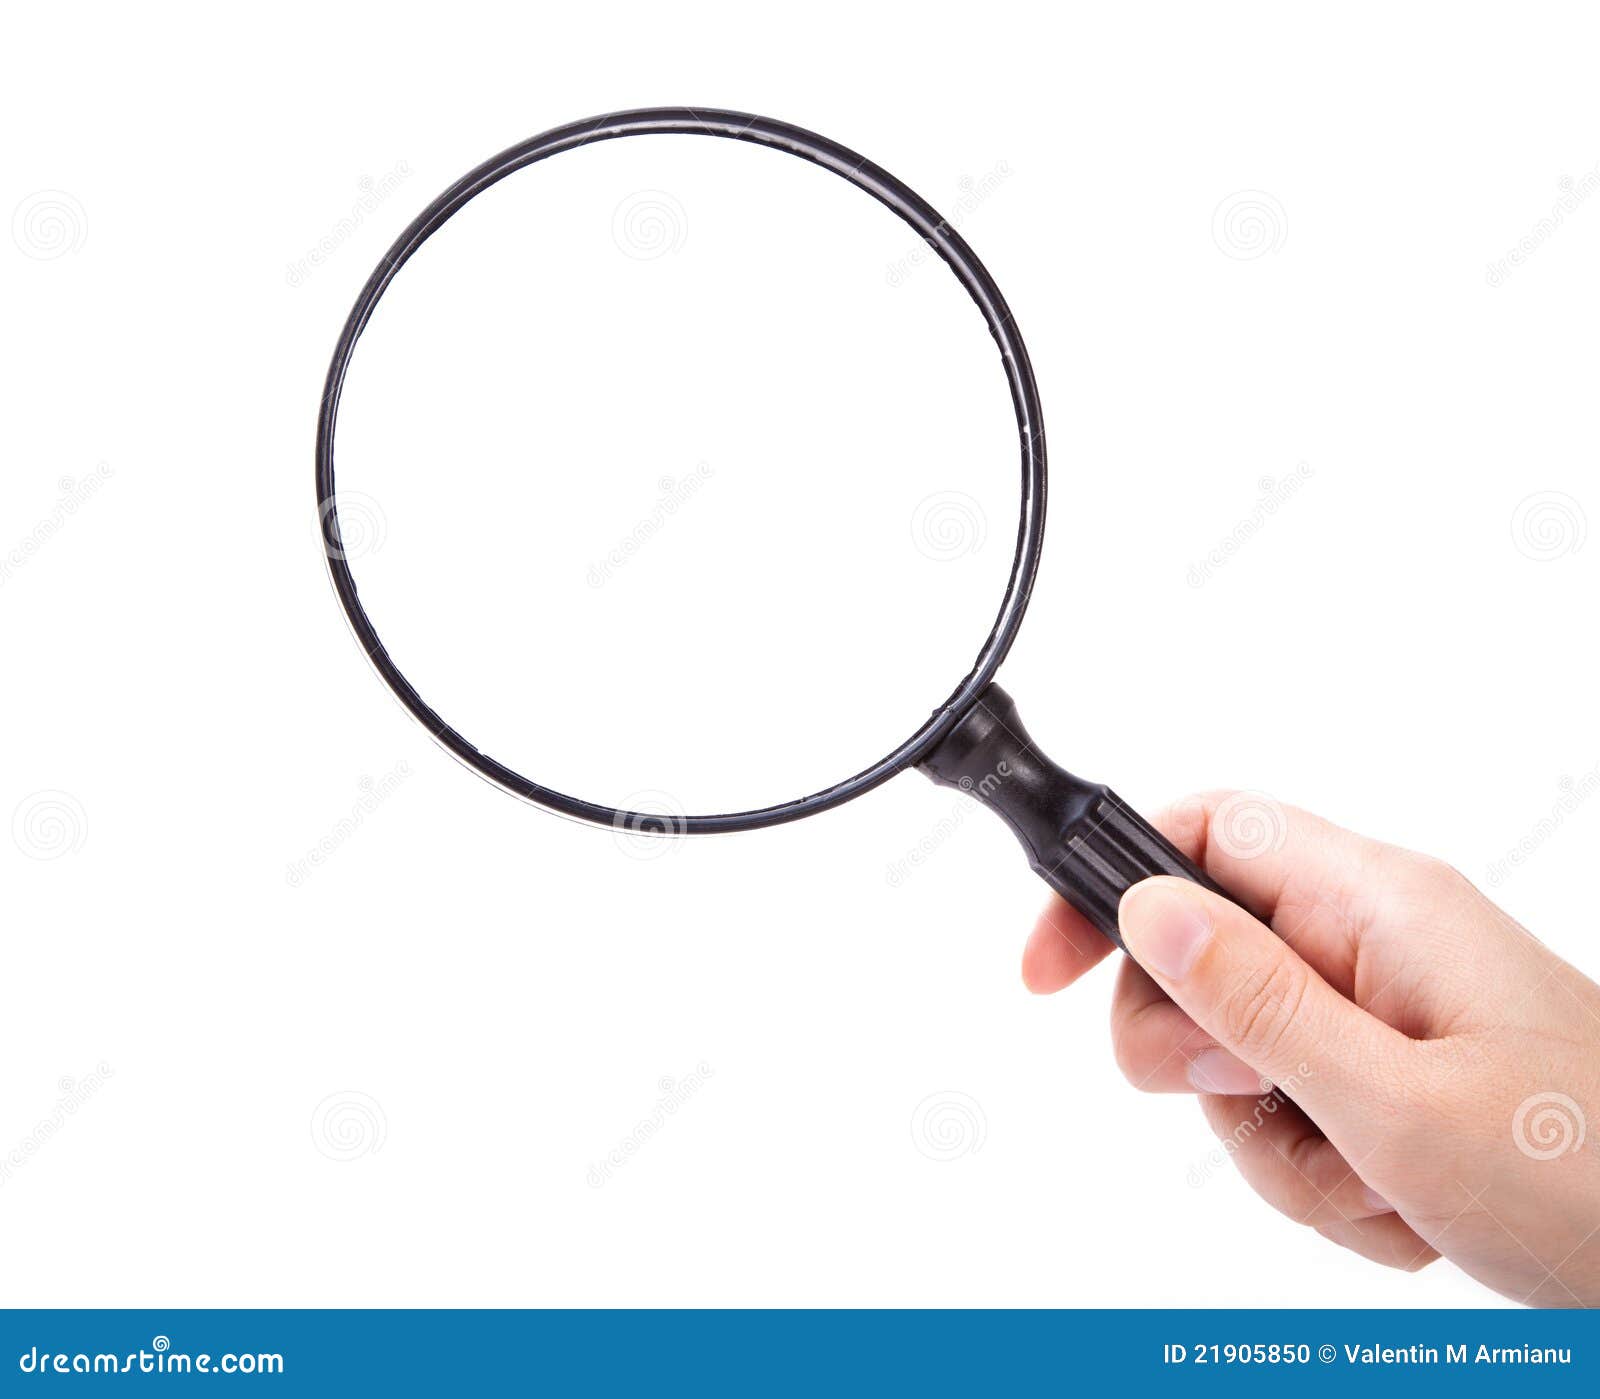 hand with magnifying glass